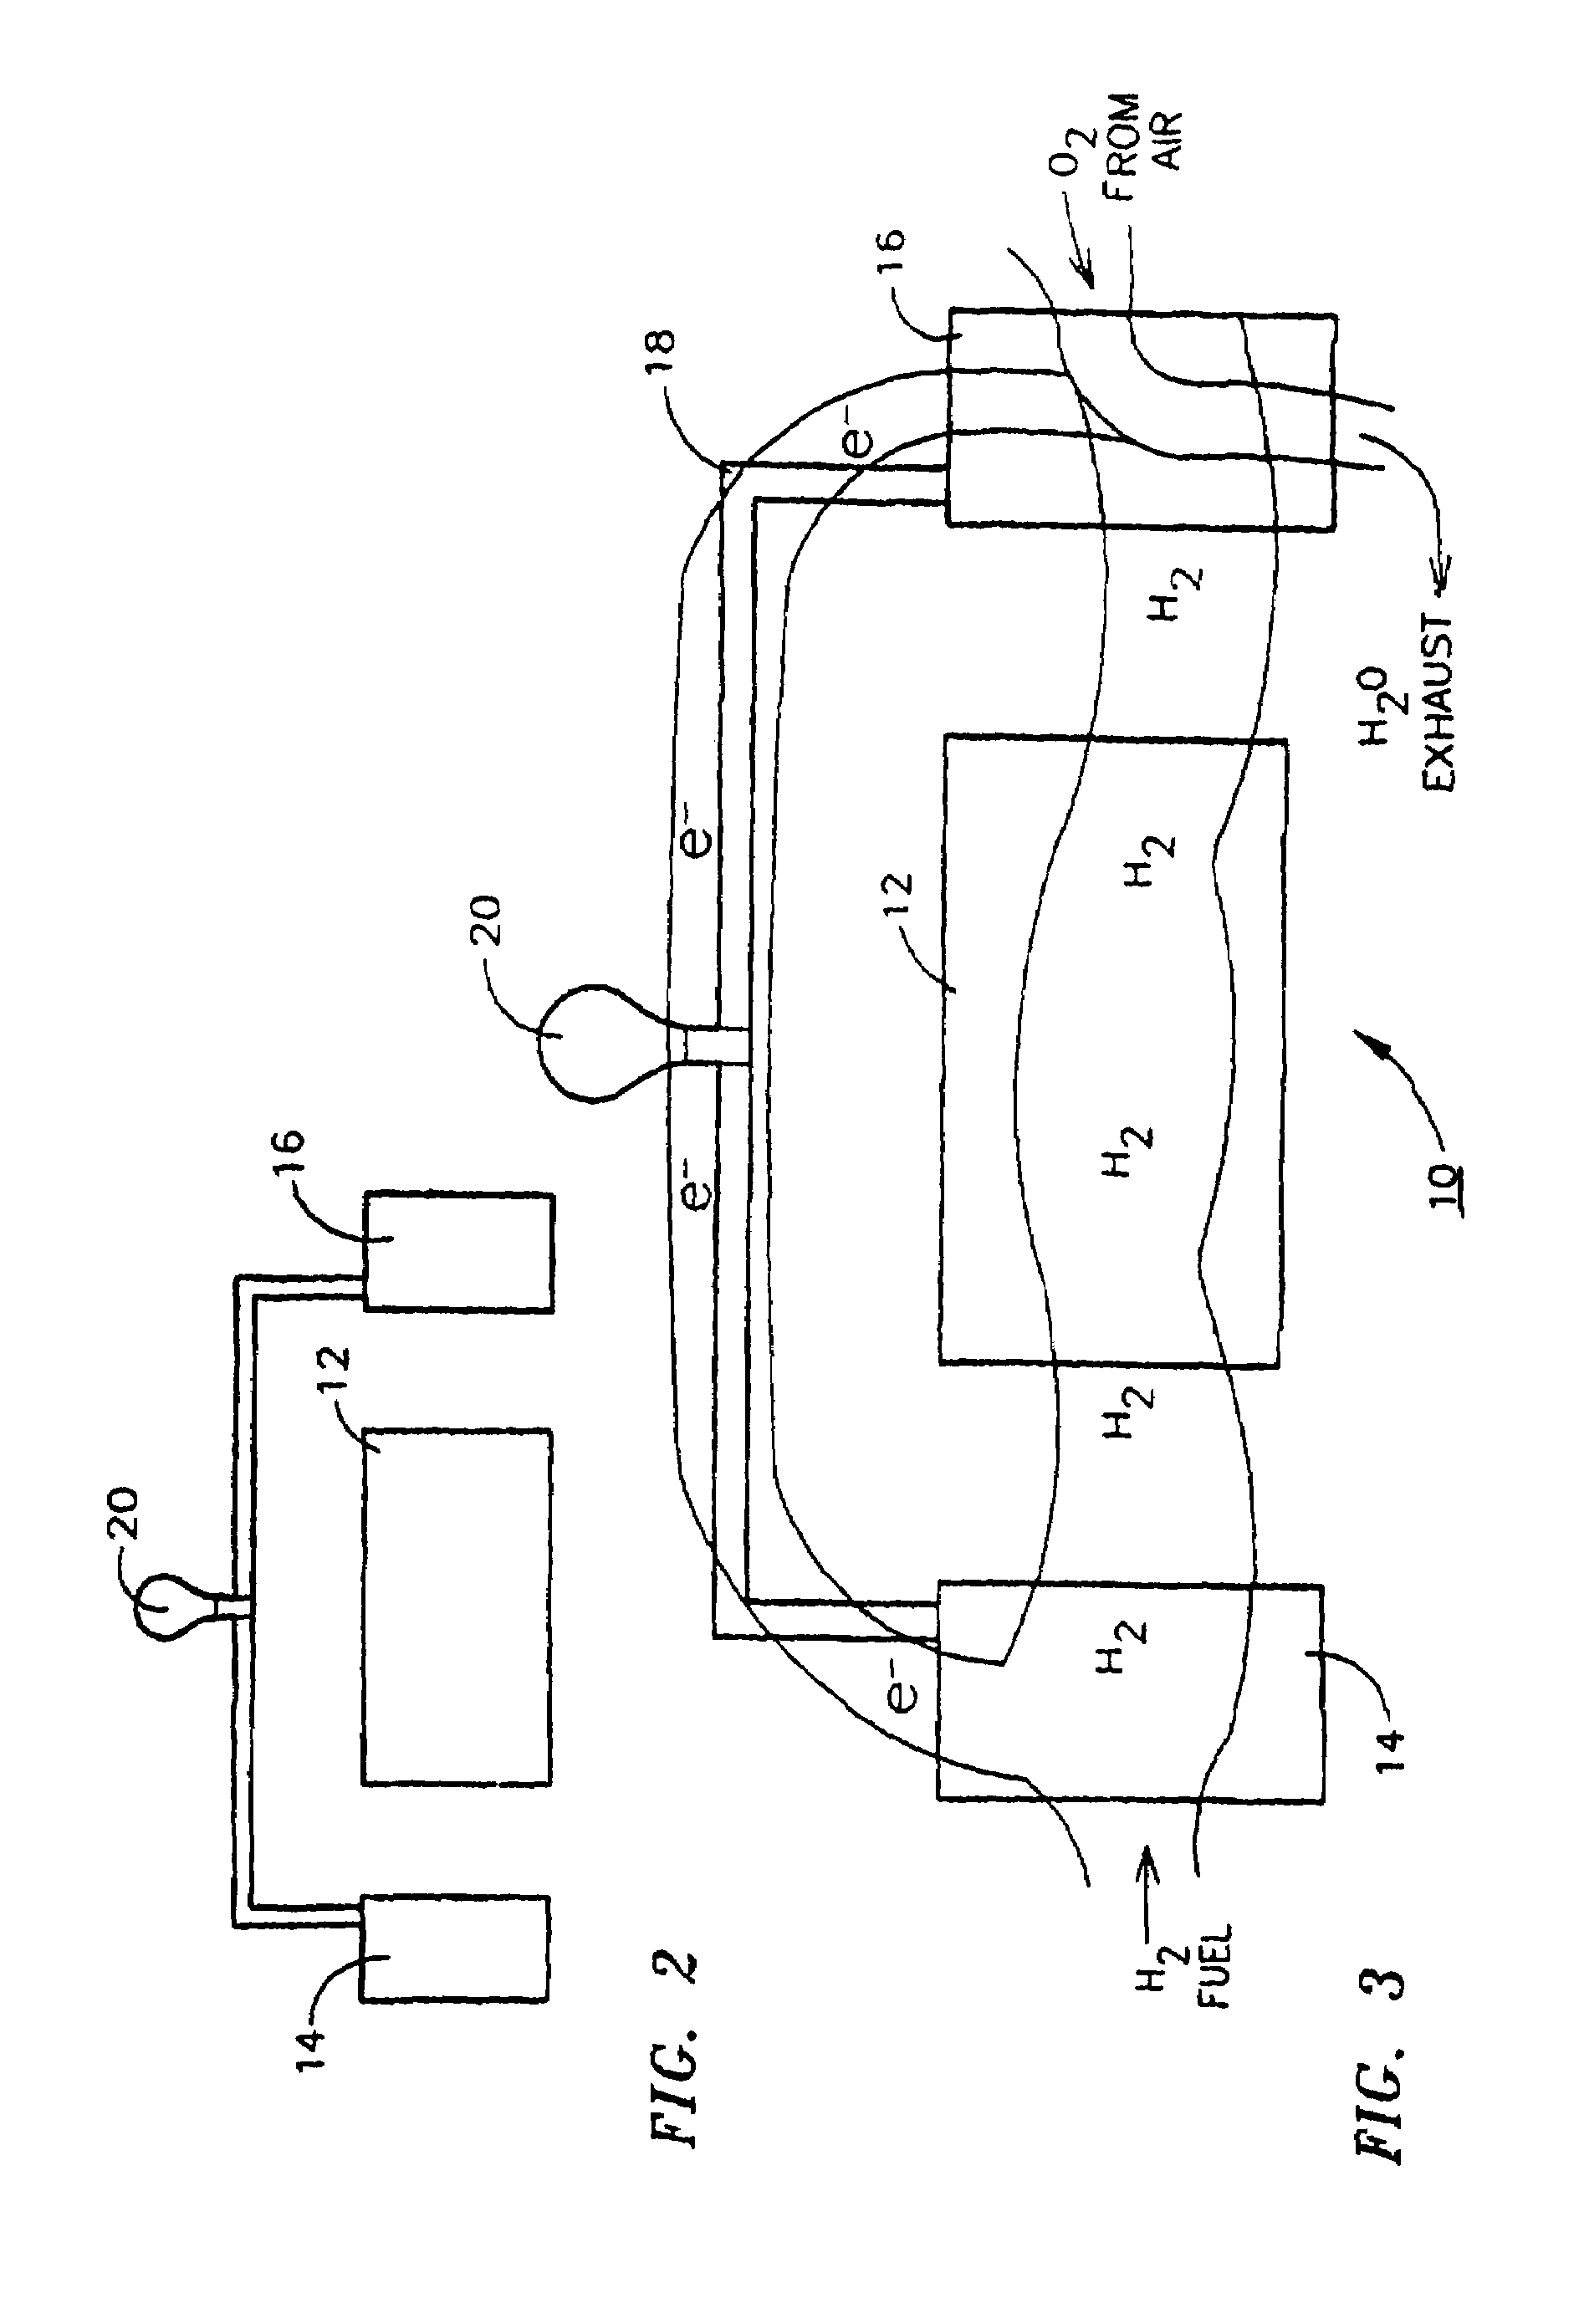 Electrochemical cell electrodes